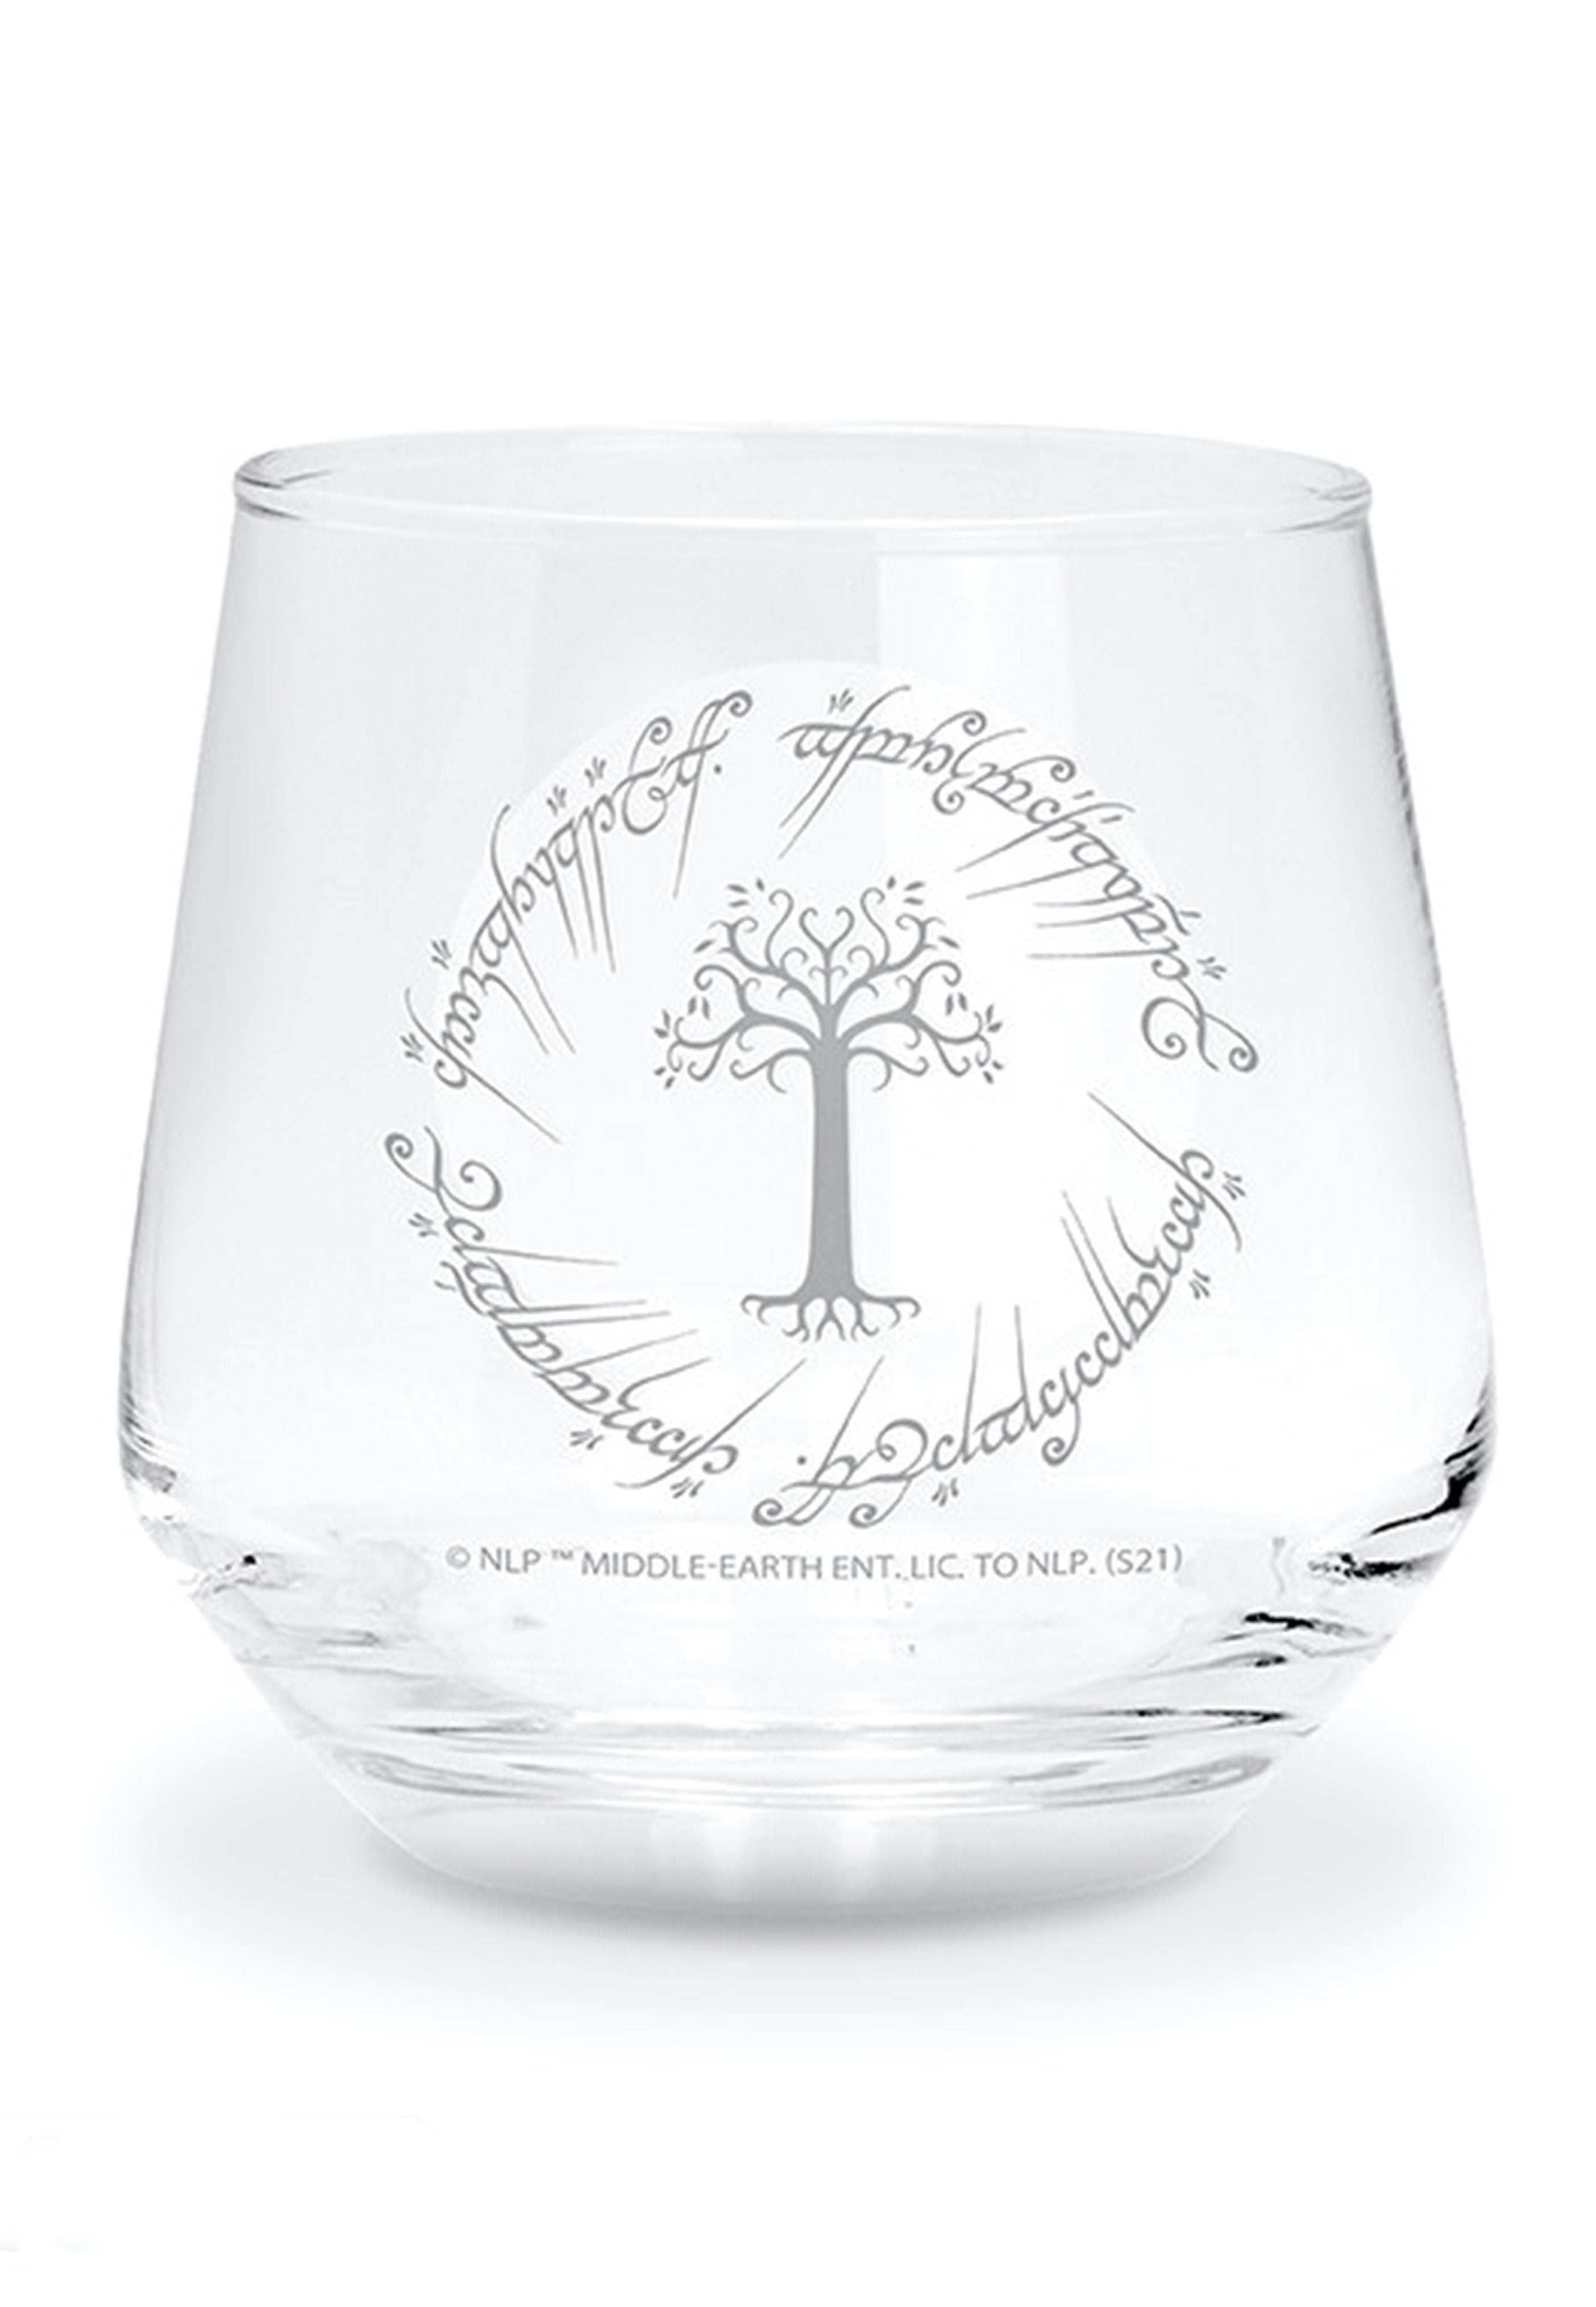 The Lord Of The Rings - Prancing Pony & Gondor Tree - Glasses